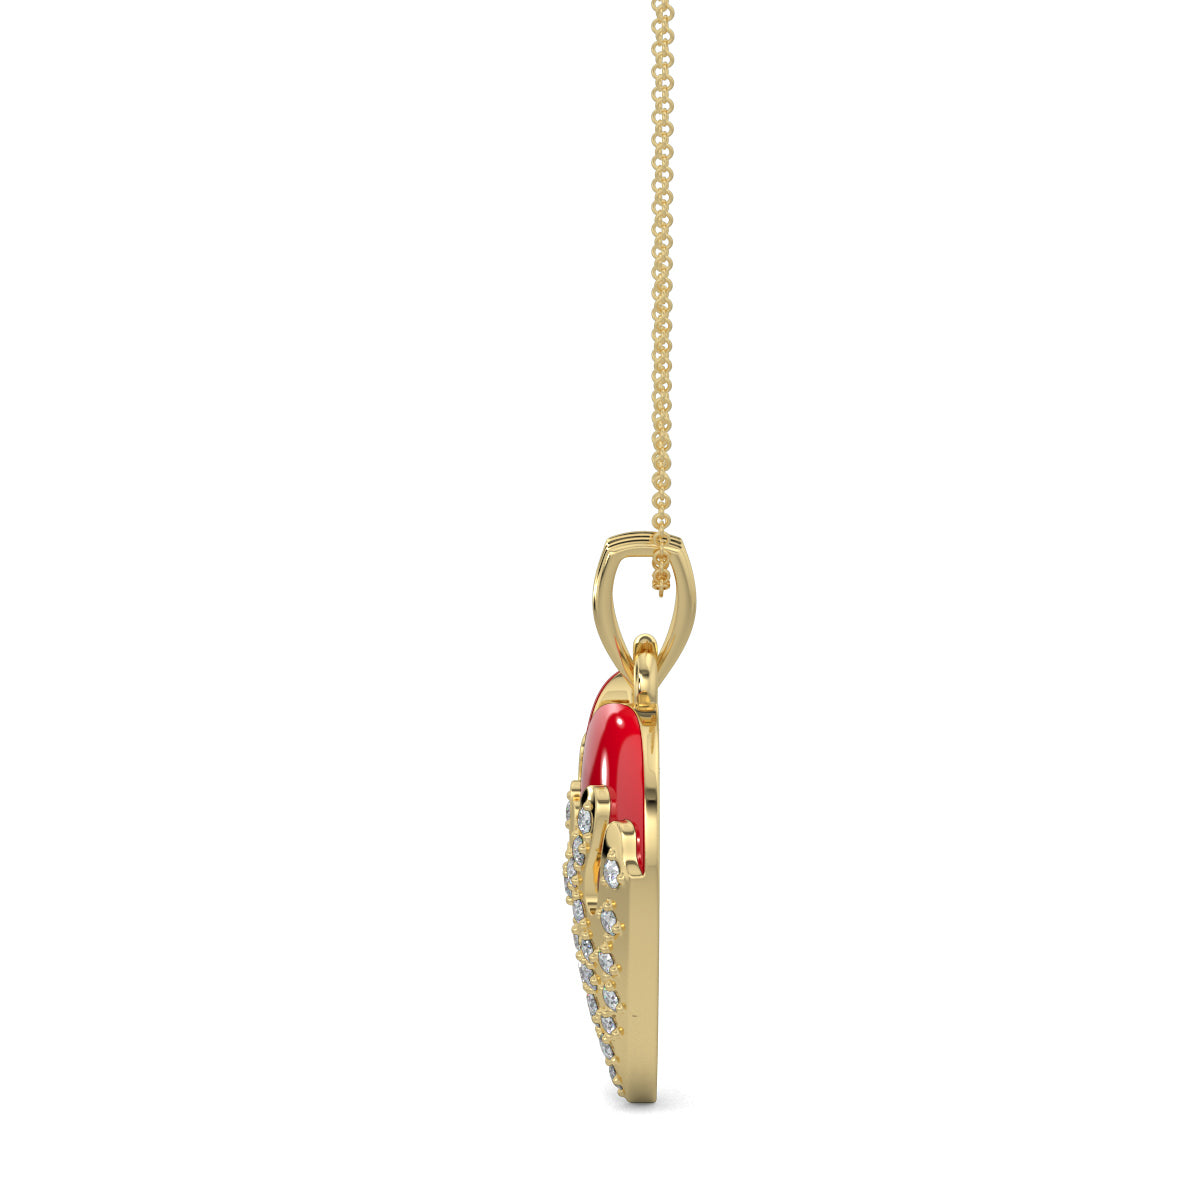 Yellow Gold, Diamond Pendants, natural diamond pendant, lab-grown diamond pendant, Eternal Flame Flicker Pendant from Forever Yours Collection, Heart-shaped Pendant, Casual Diamond Pendant, Red Enamel, Everyday Jewelry, Flame-inspired Designnt